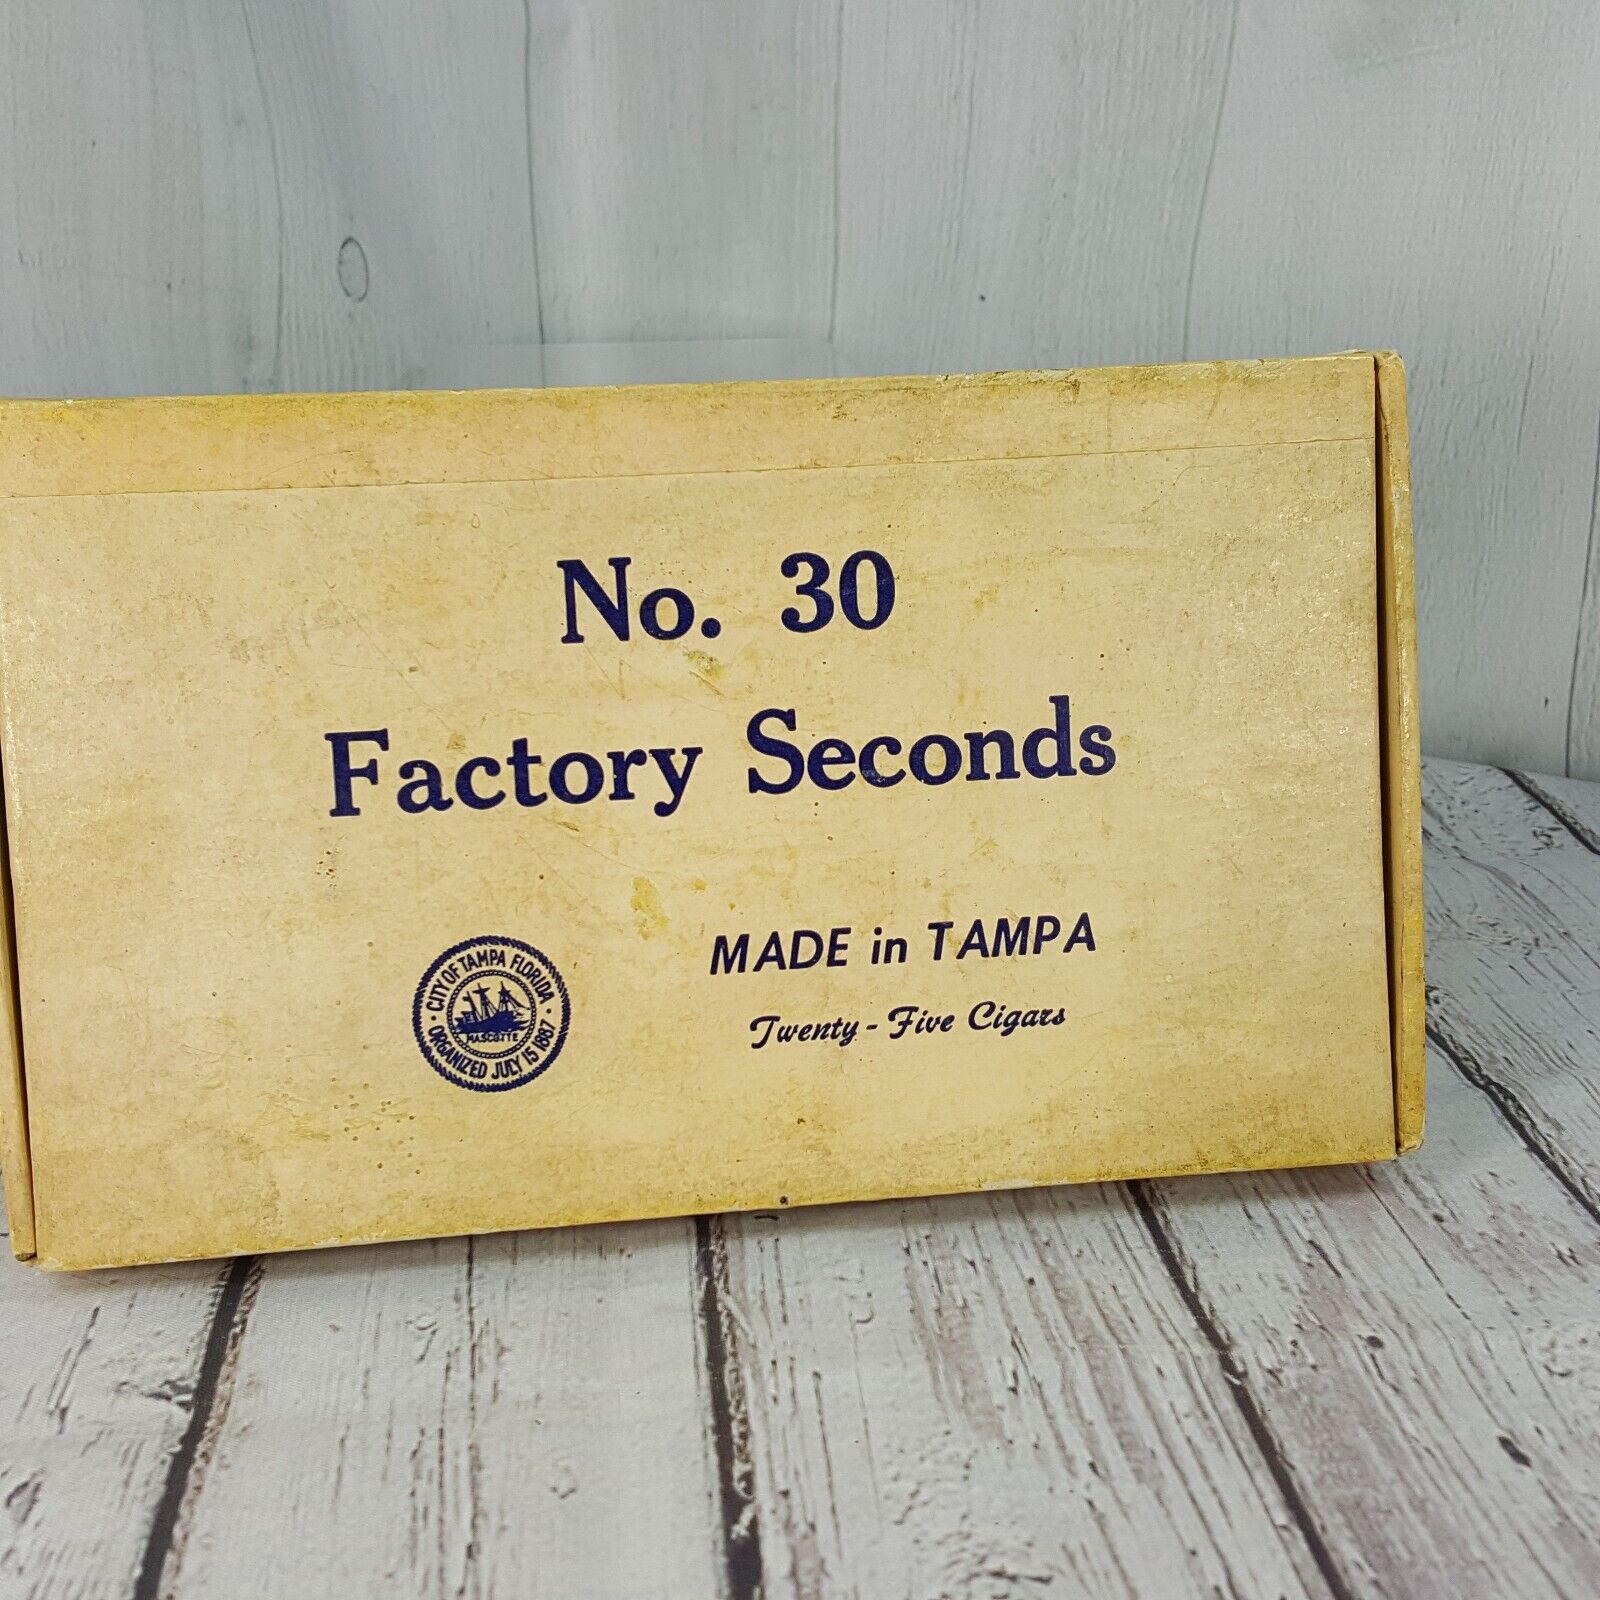 Vintage Cigar Box No 30 Factory Seconds Made in Tampa Permit TP 15 - Max 4 cents